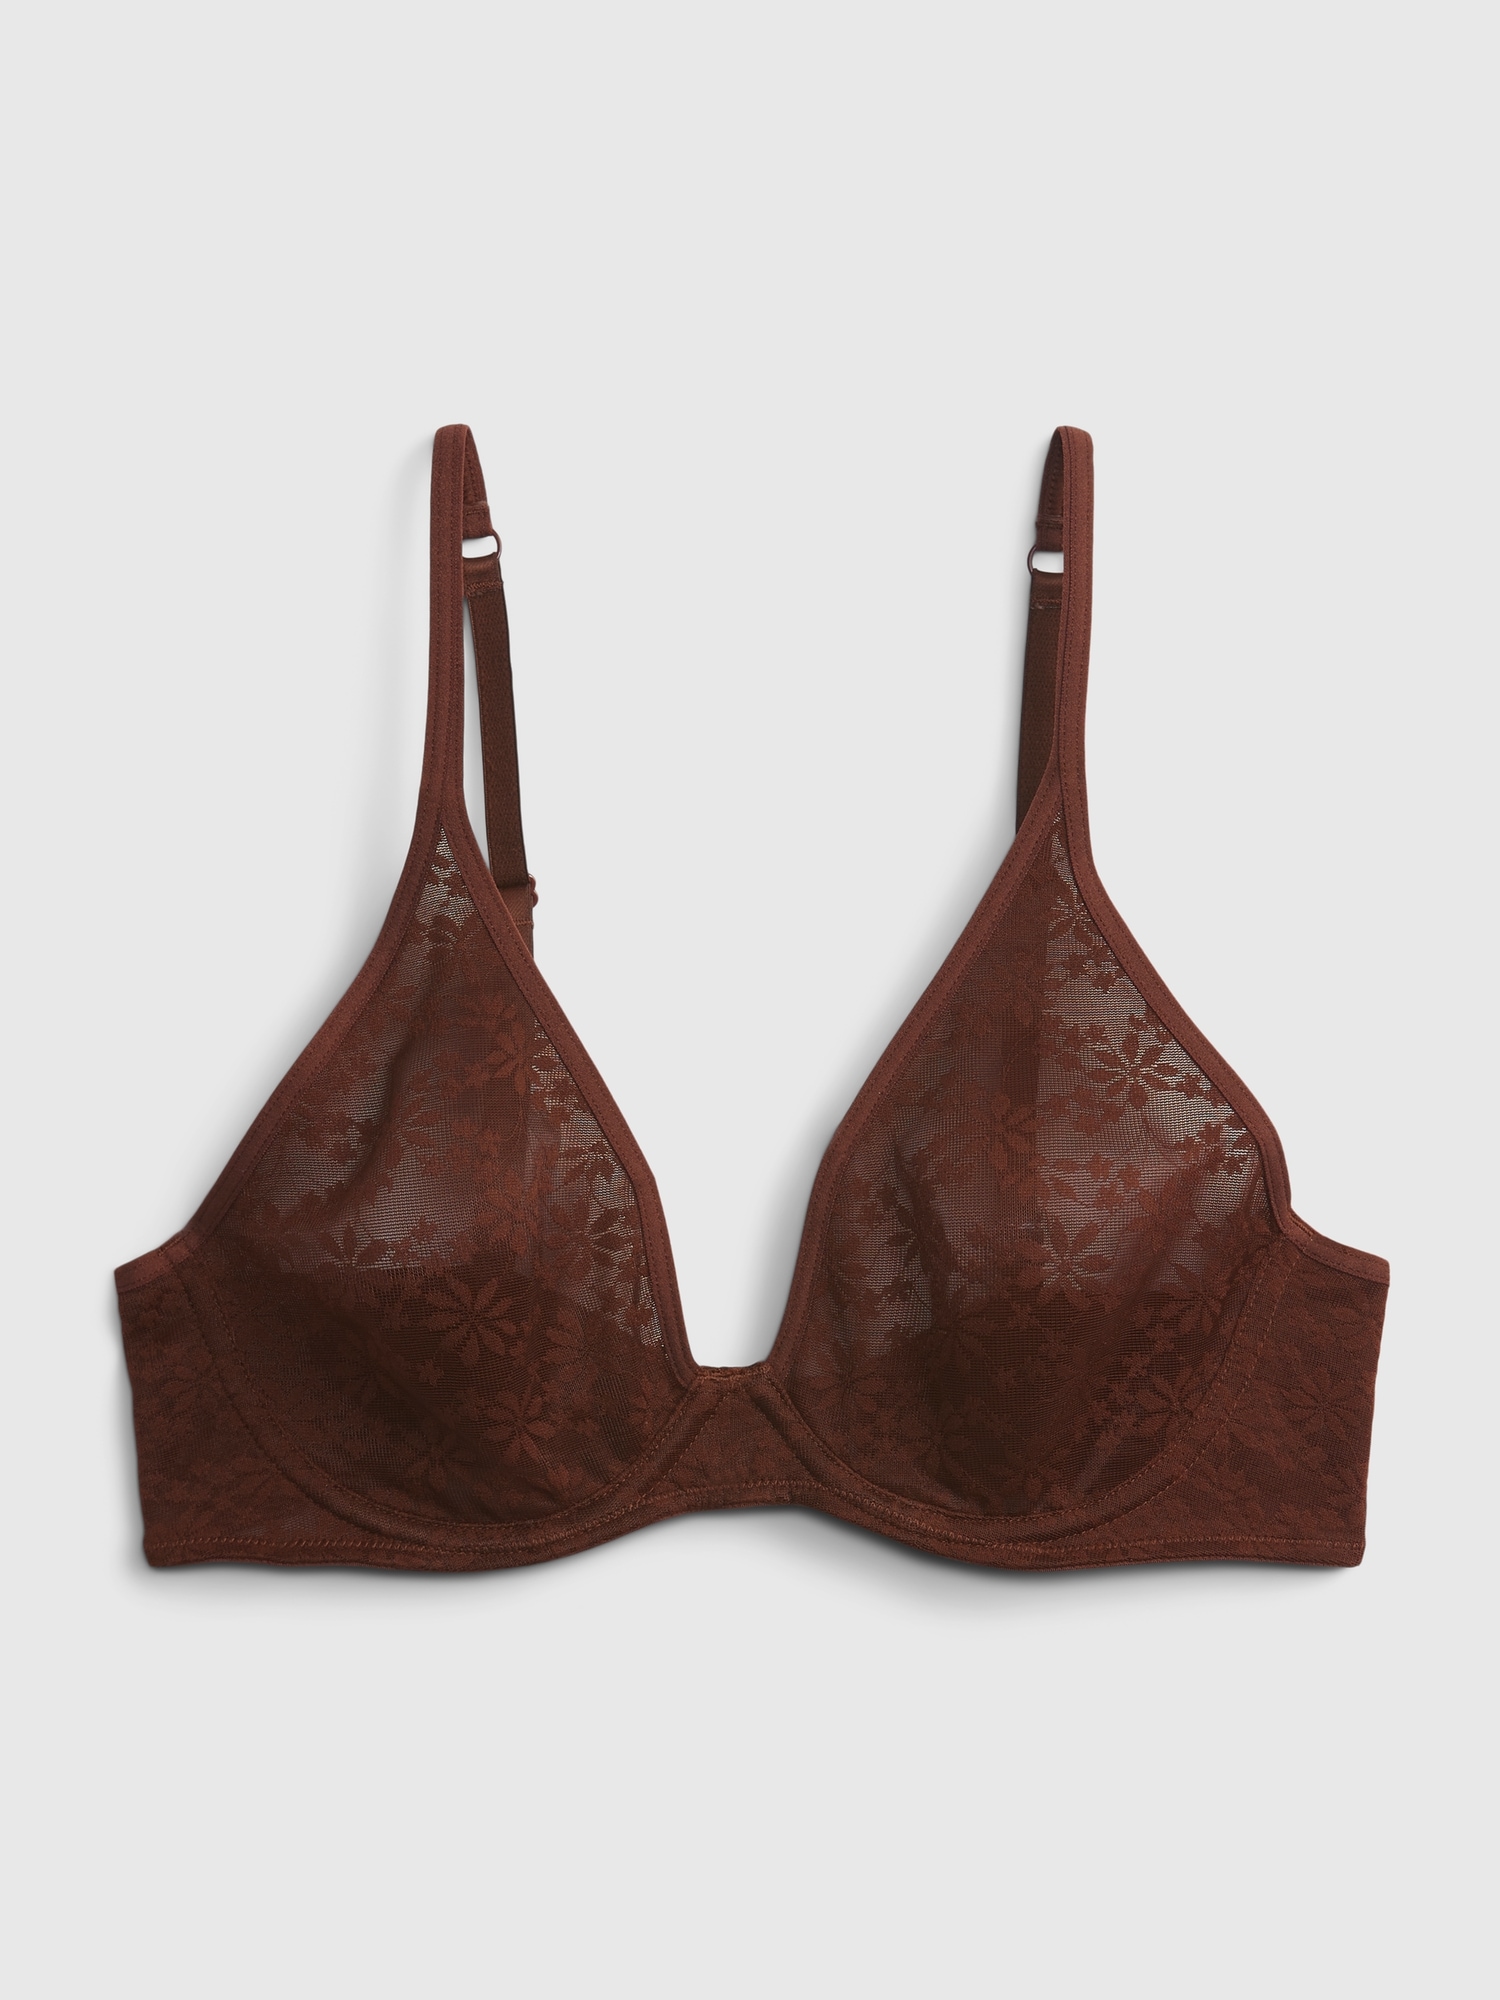 Buy Gap Breathe Favourite Lace Bra from the Gap online shop